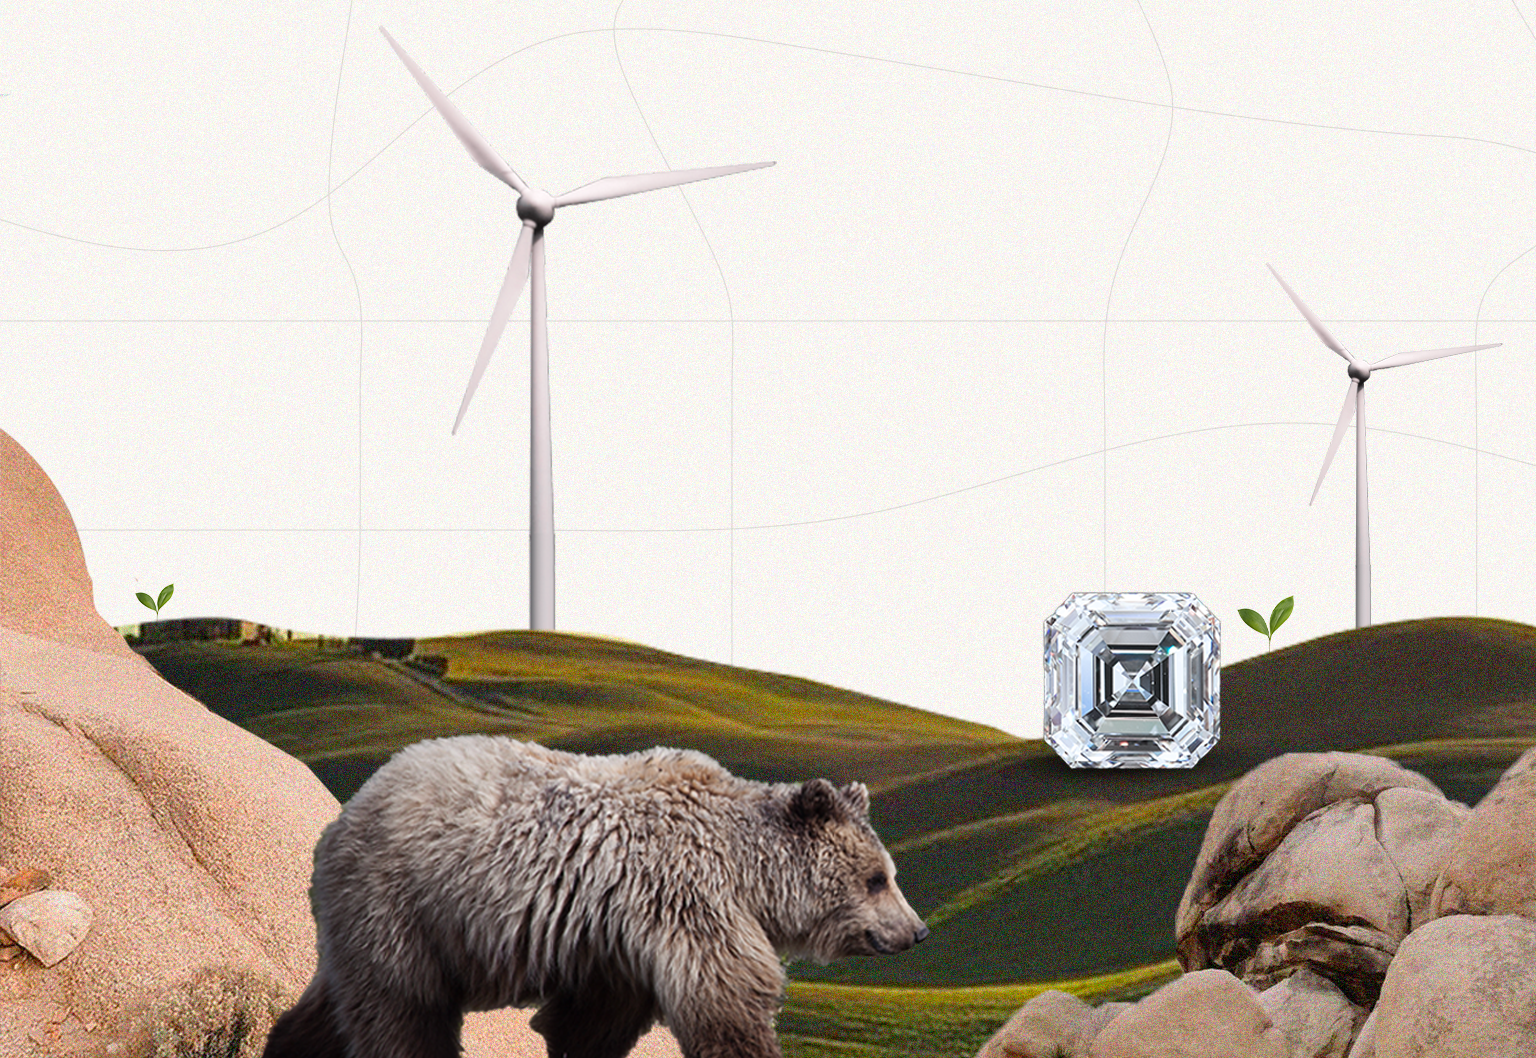 A bear walking in a grassy area with wind turbines